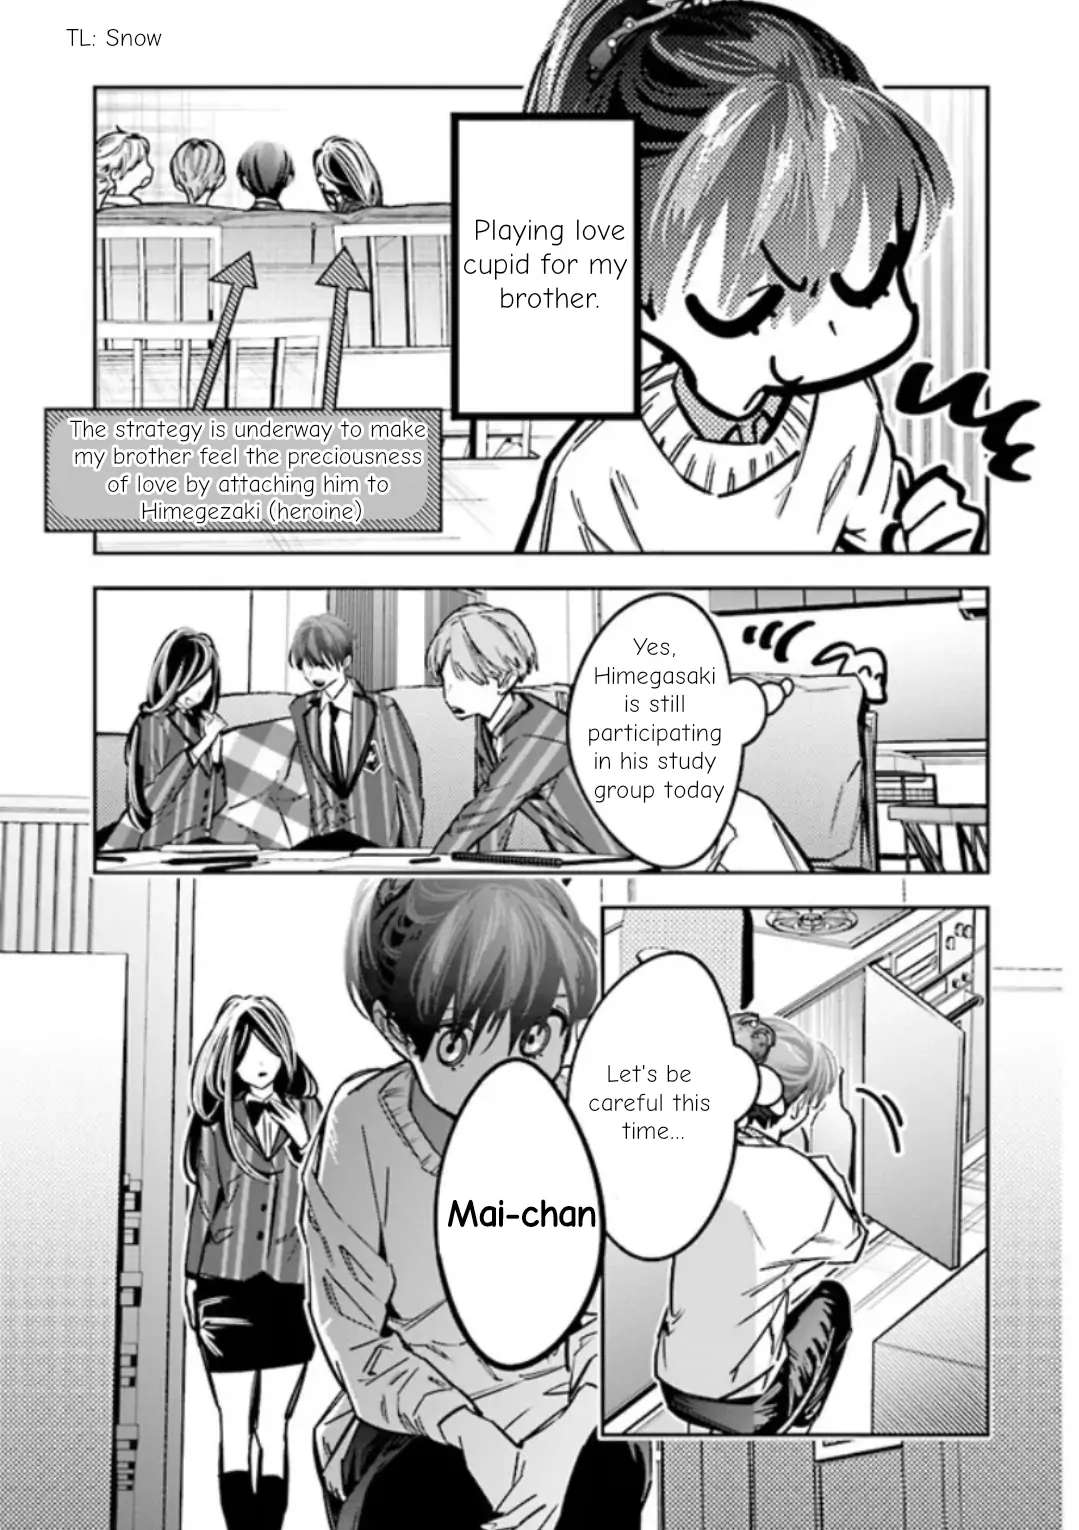 I Reincarnated as the Little Sister of a Death Game's Murder Mastermind and Failed - chapter 10 - #5